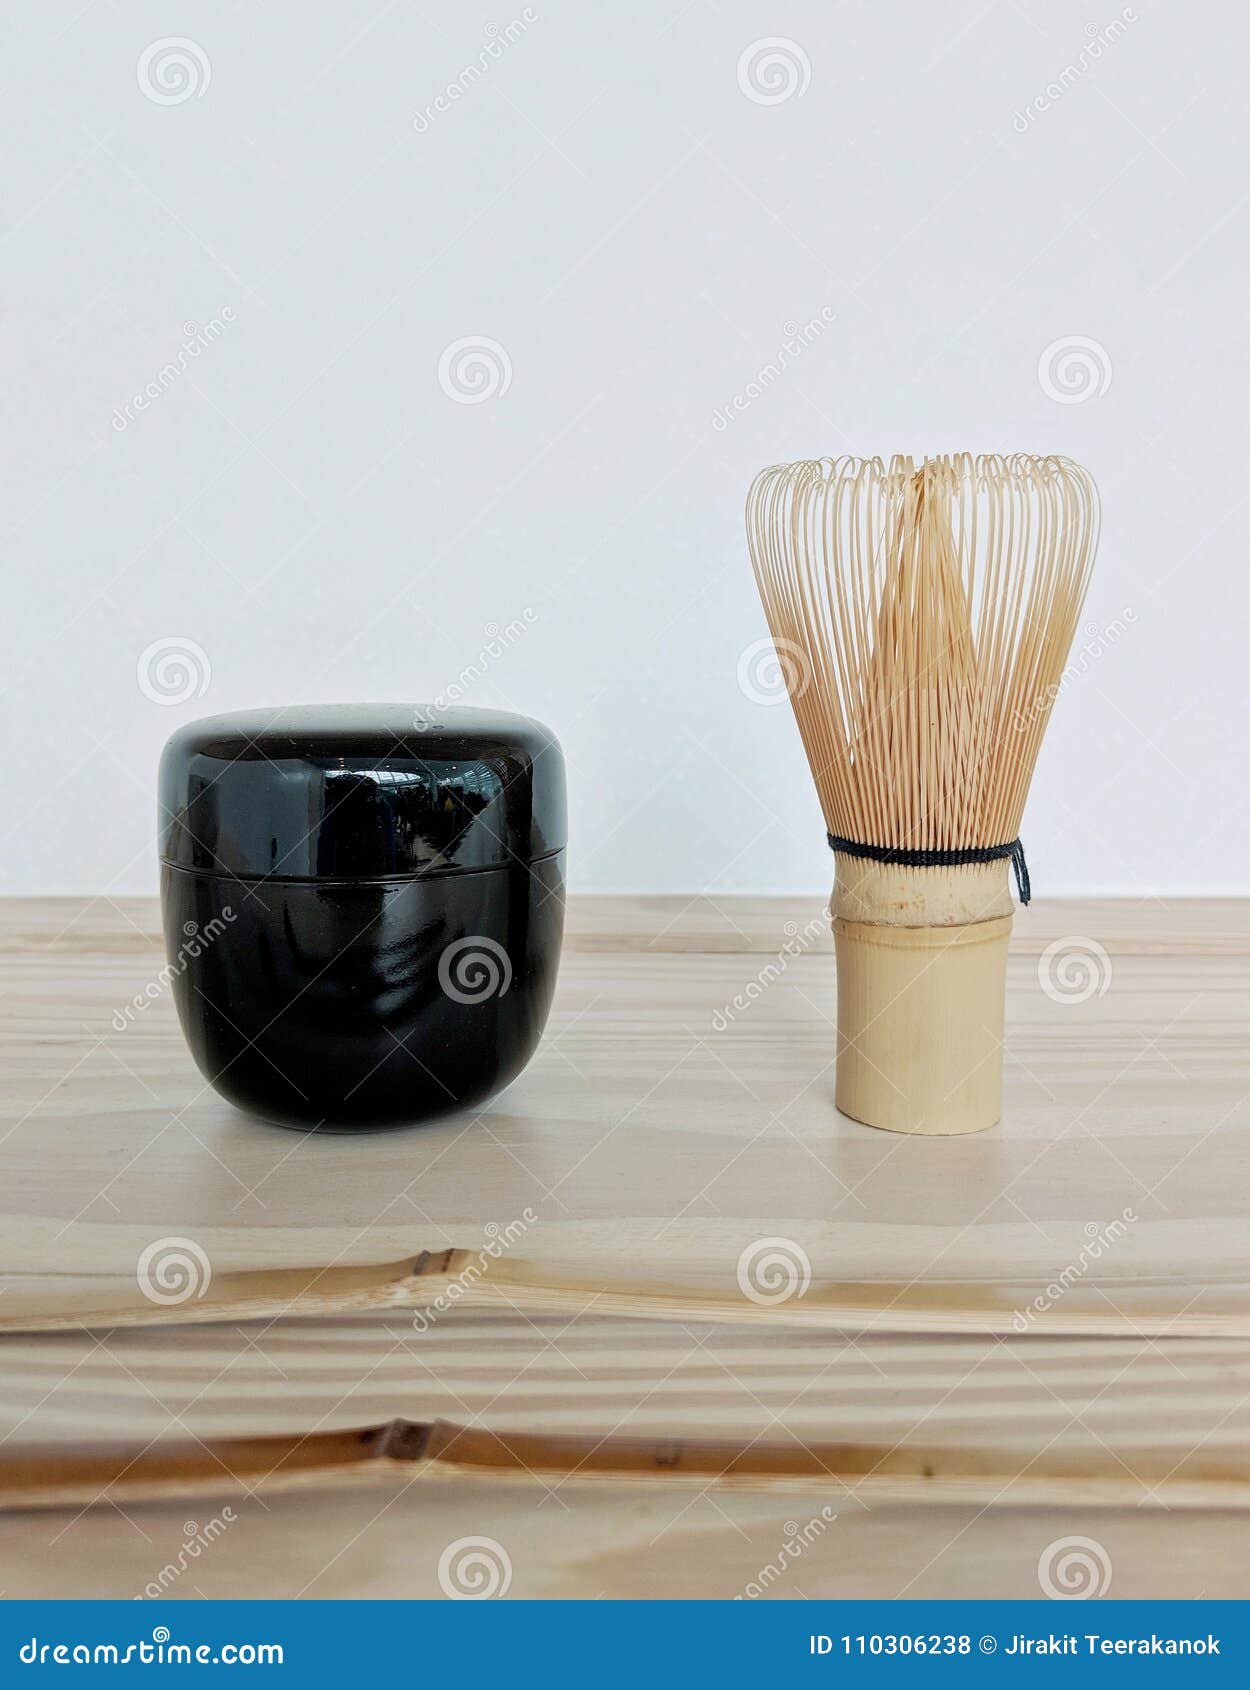 https://thumbs.dreamstime.com/z/bamboo-tea-whisk-black-shiny-small-matcha-caddy-carved-single-piece-japanese-mixer-ceremony-110306238.jpg